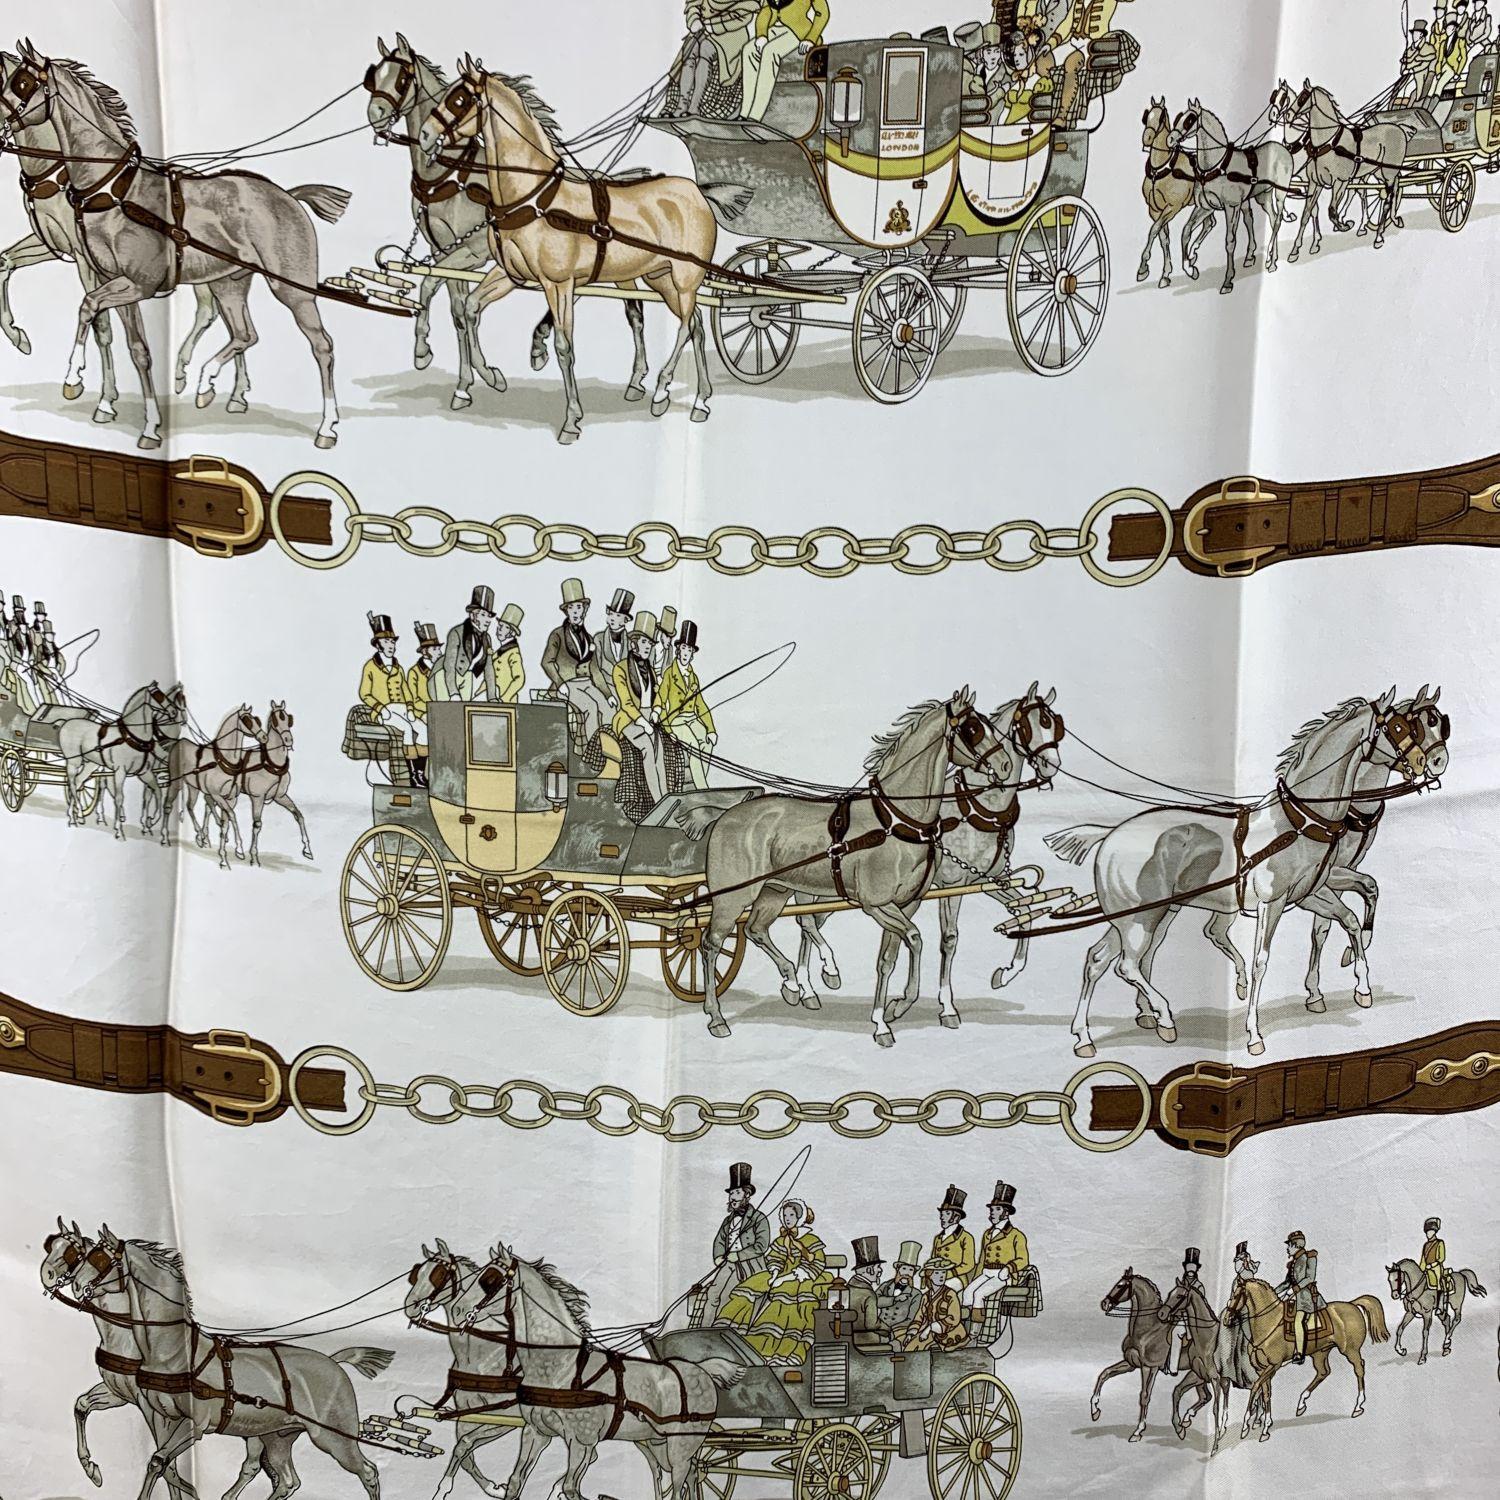 HERMES Silk scarf named 'Attelages a Quatre (1820-1860)/ Four in Hand', created by artist Philip Ledoux, and first issued in 1970. Brown borders. 100% Silk. Hand rolled edges. Approx measurements: 35 x 35 inches - 88,8 x 88,8 cm


Details

MATERIAL: